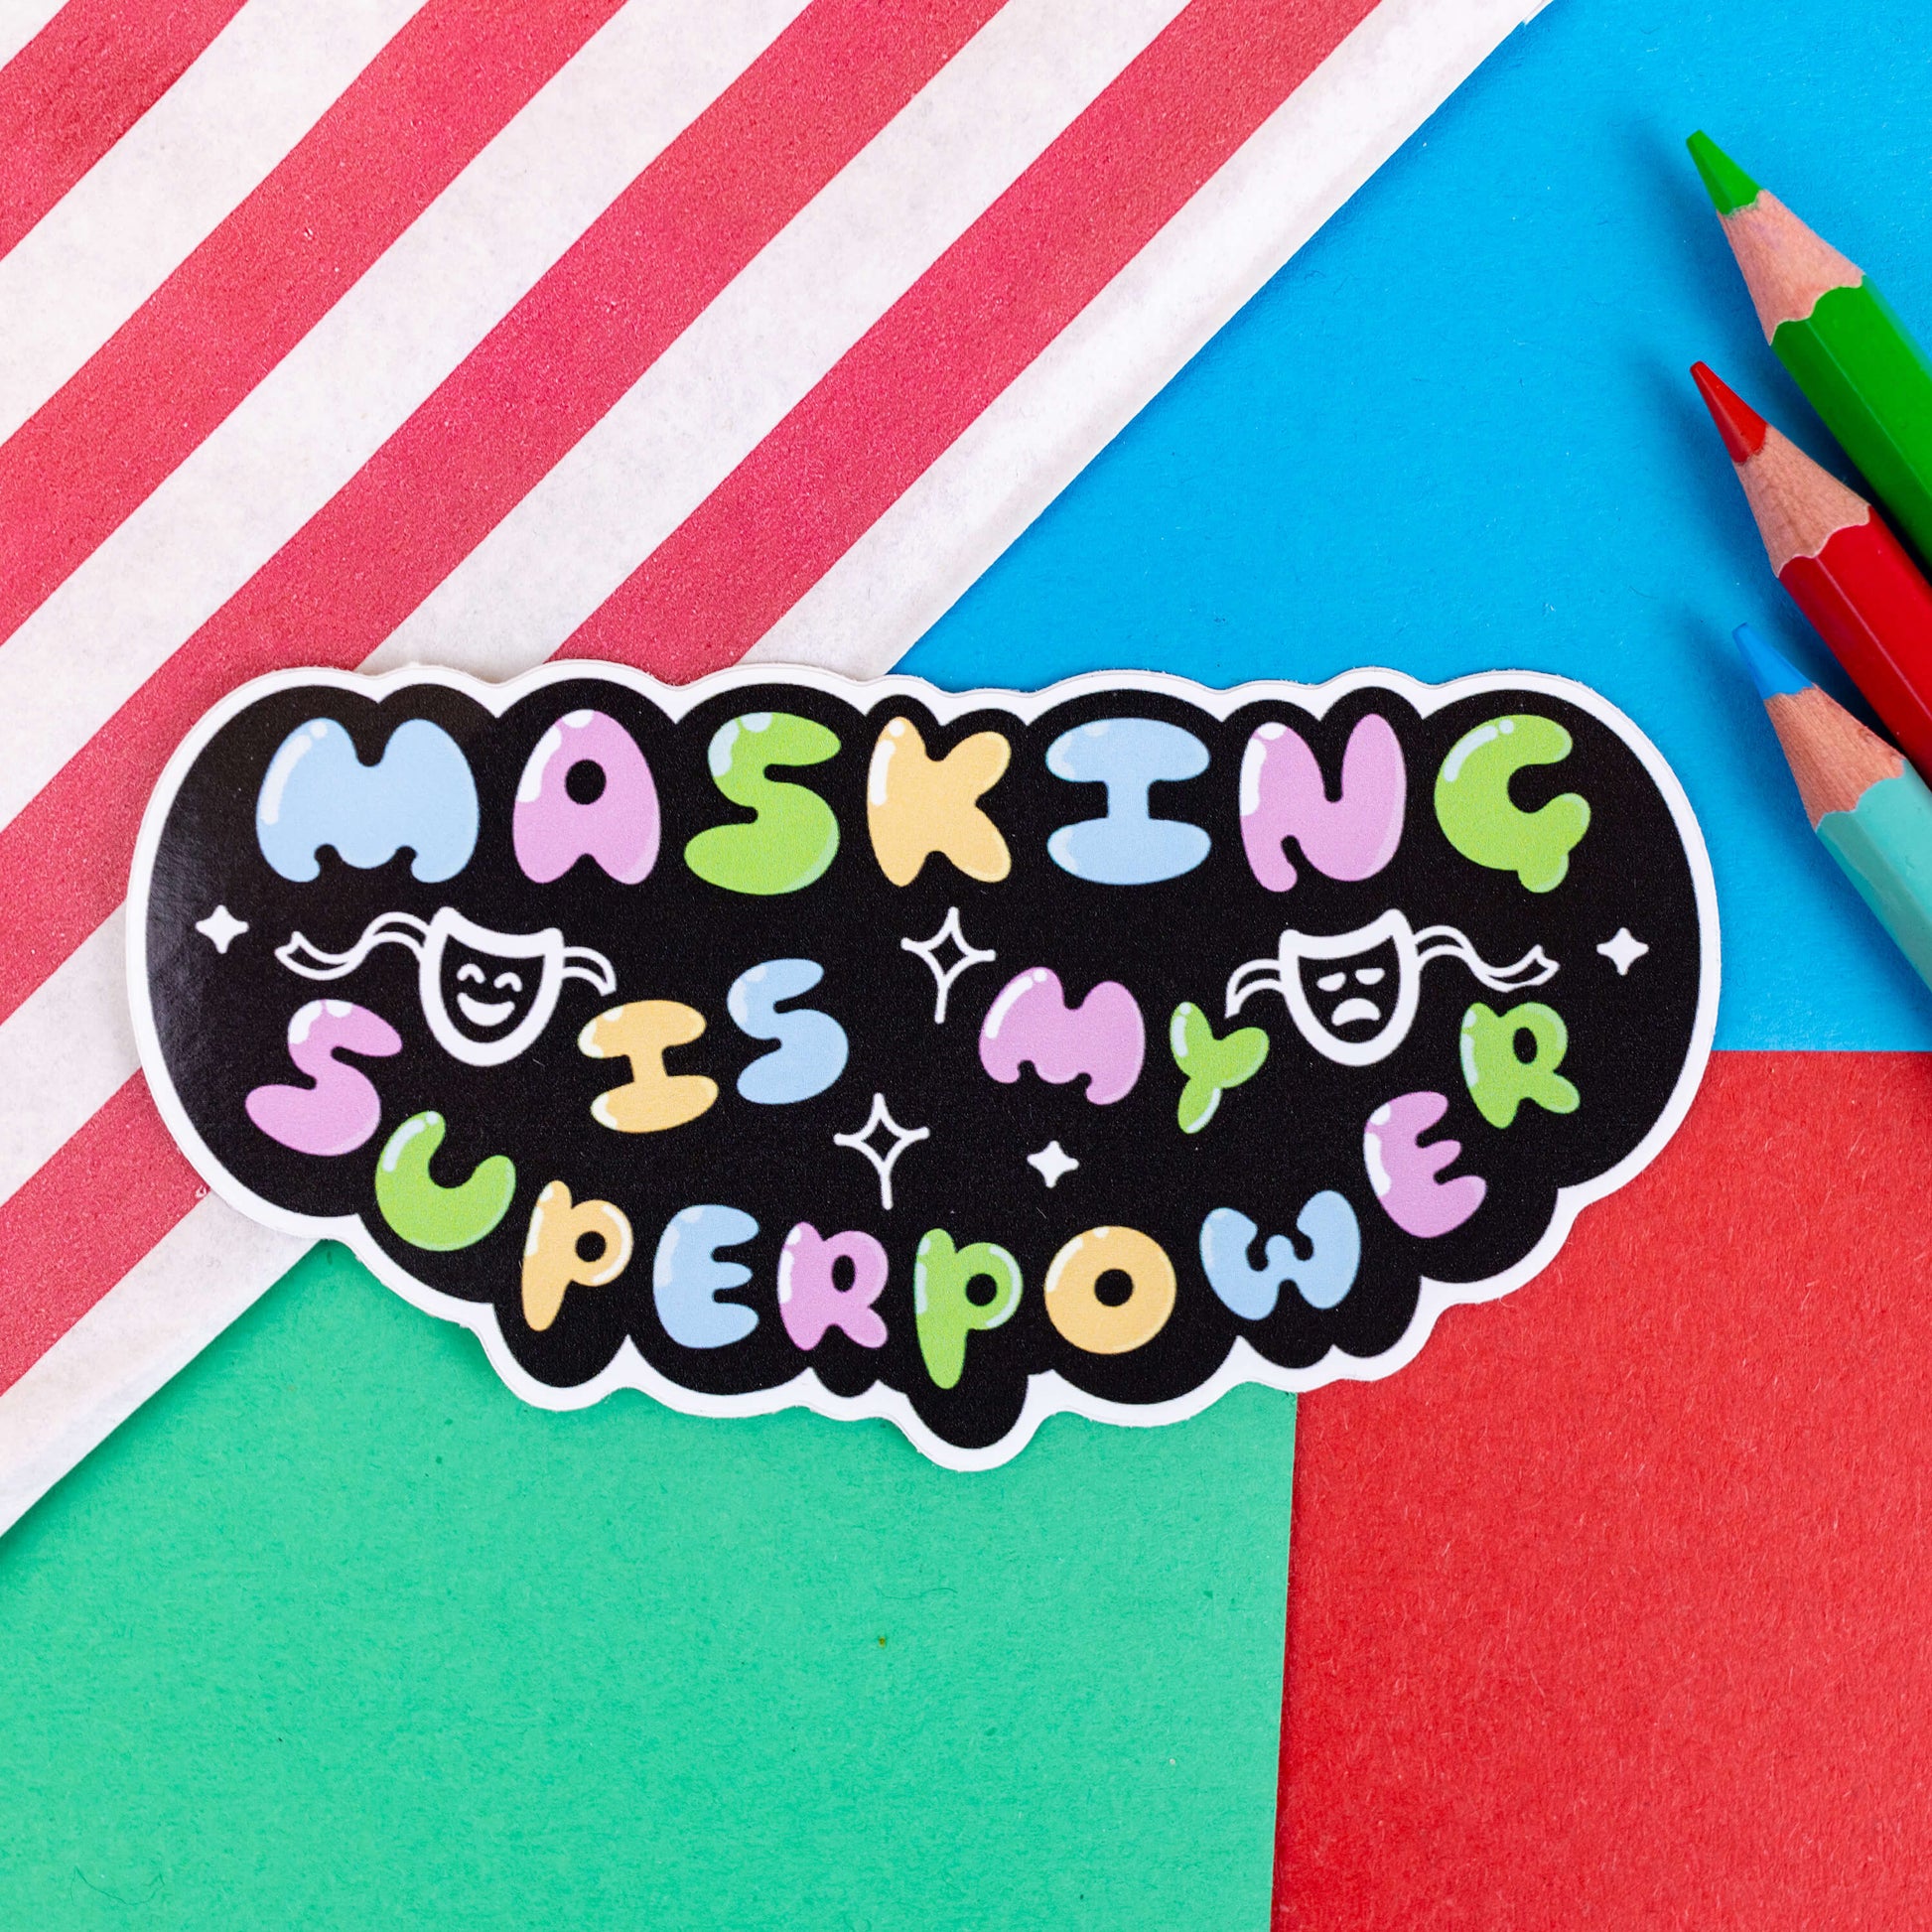 The Masking is my Superpower Sticker on a red, blue and green background with a red stripy candy bag and colouring pencils. The black base sticker features pastel rainbow bubble writing that reads 'masking is my superpower' with white sparkles, a happy and sad drama masks all on a black oval. Raising awareness for neurodivergent people with ADHD or Autism.